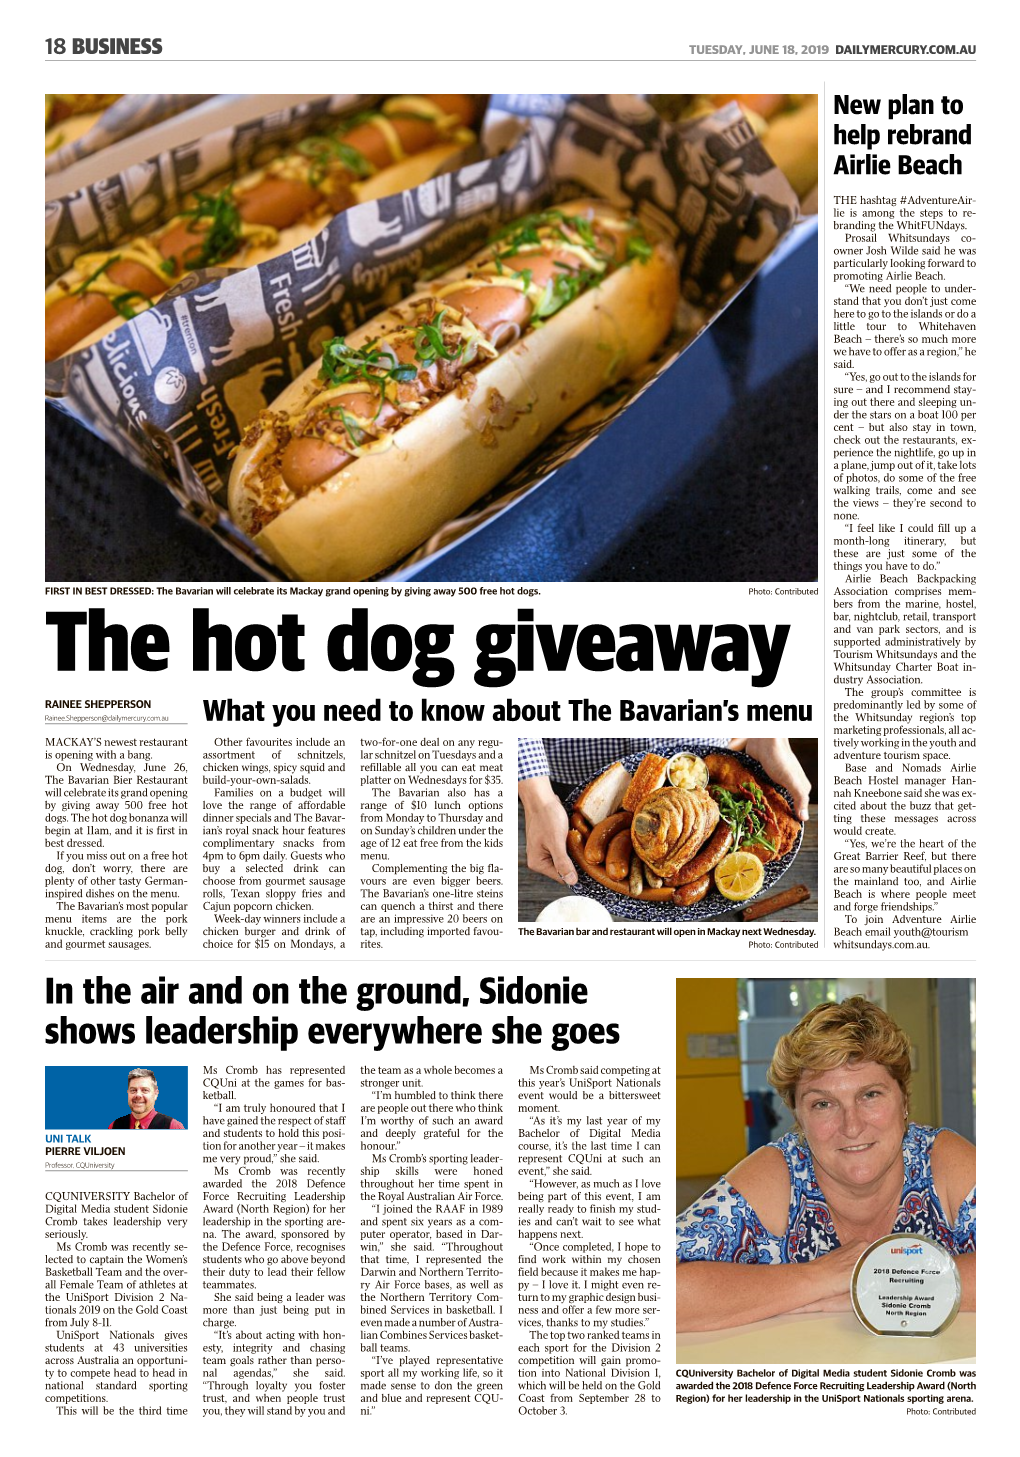 The Hot Dog Giveaway Tourism Whitsundays and the Whitsunday Charter Boat In- Dustry Association